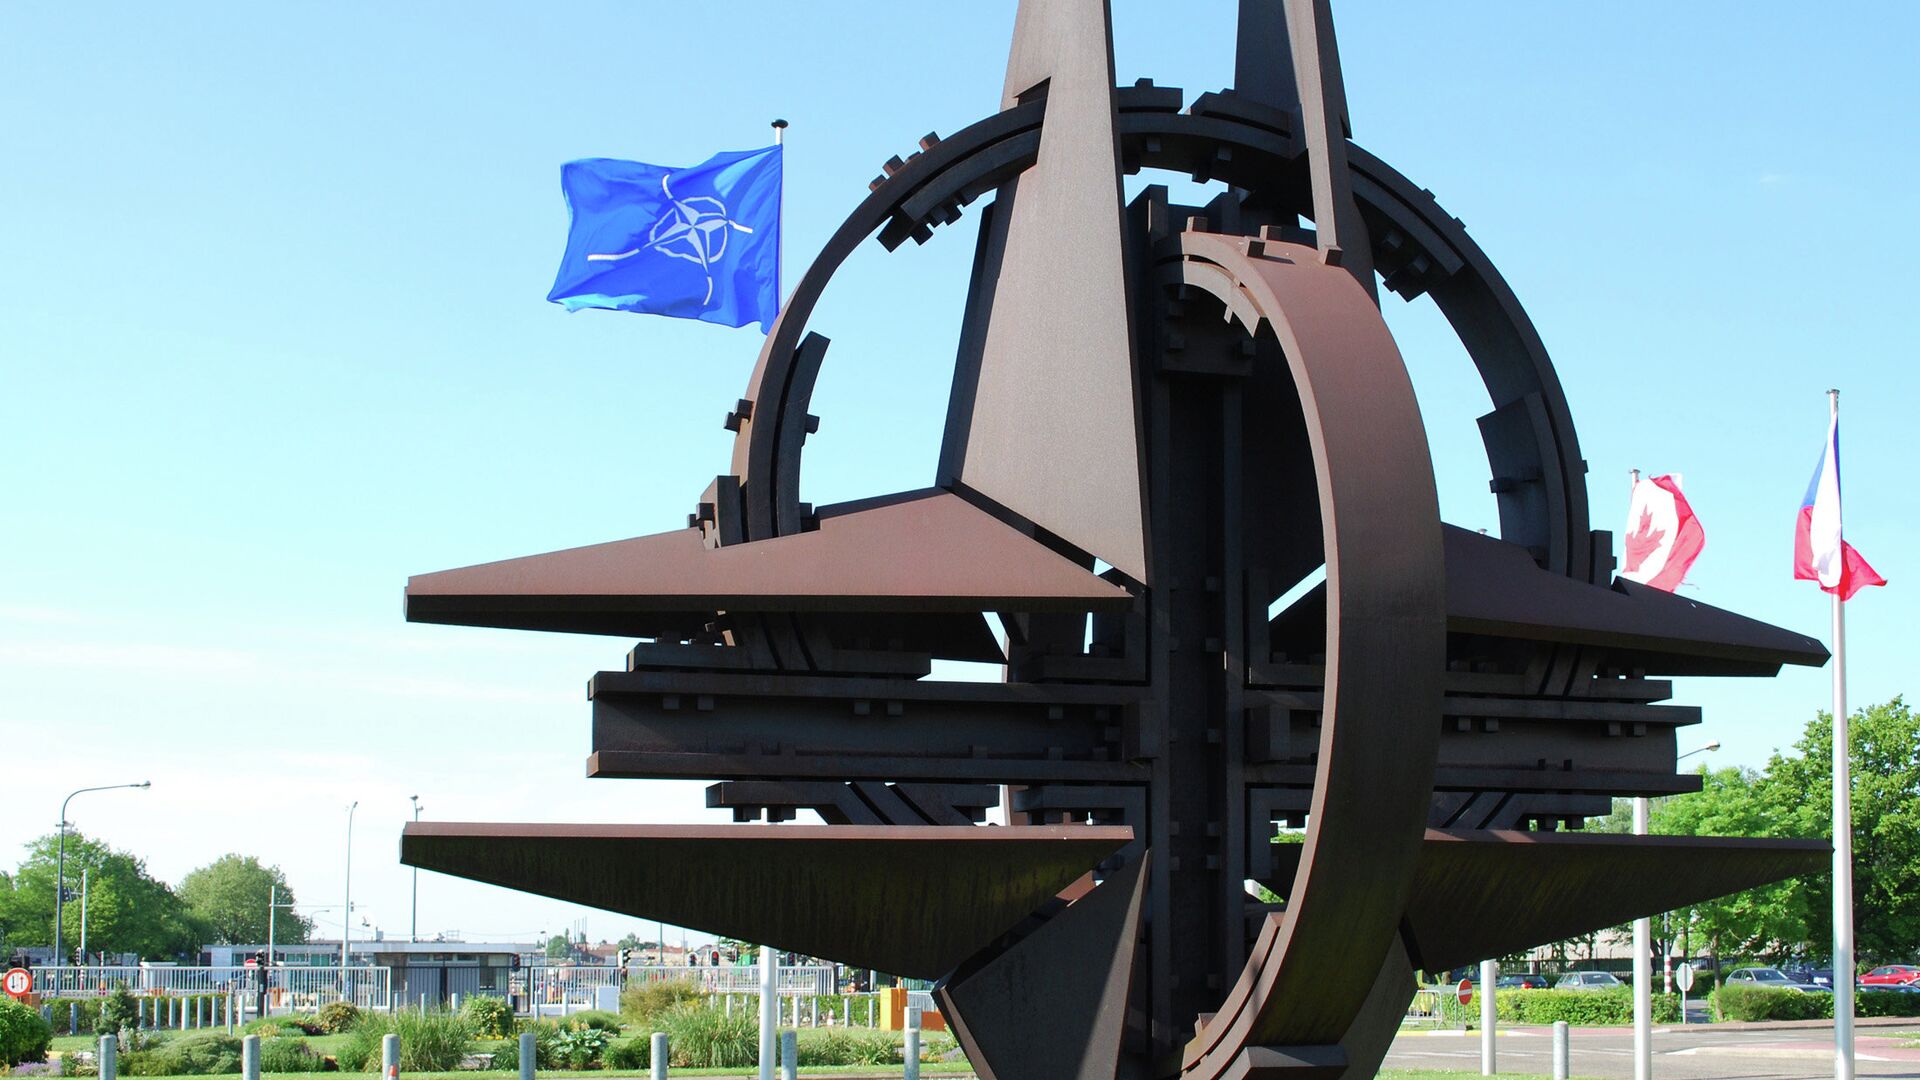 Senior US administration official said that Ukraine's membership in NATO is not being considered by the alliance. - Sputnik International, 1920, 05.04.2022